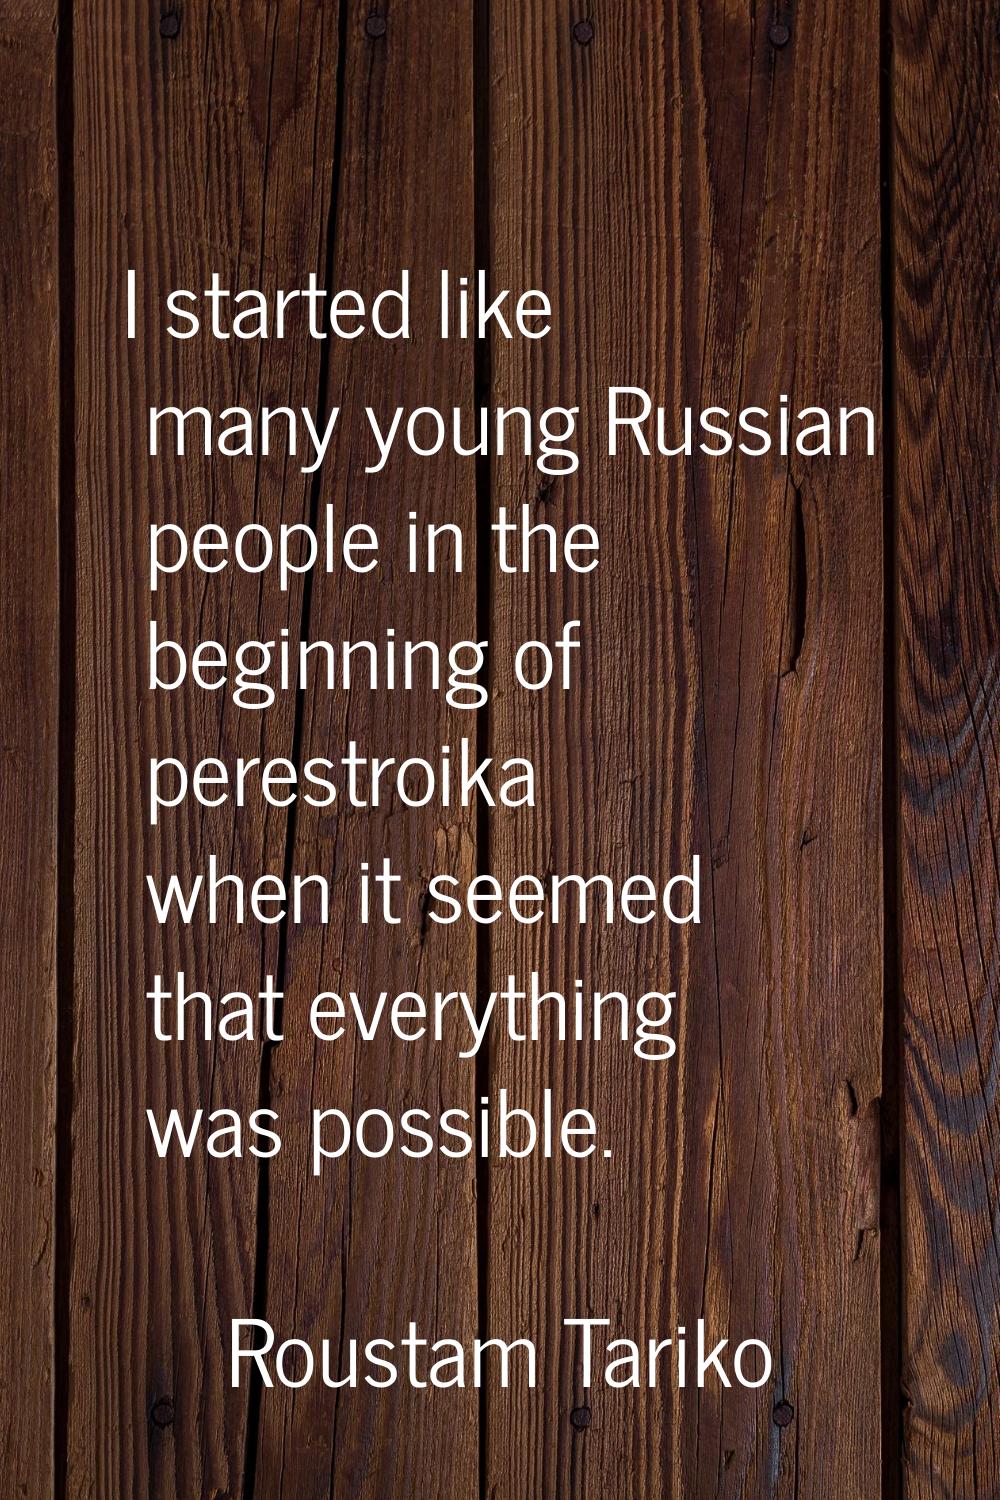 I started like many young Russian people in the beginning of perestroika when it seemed that everyt